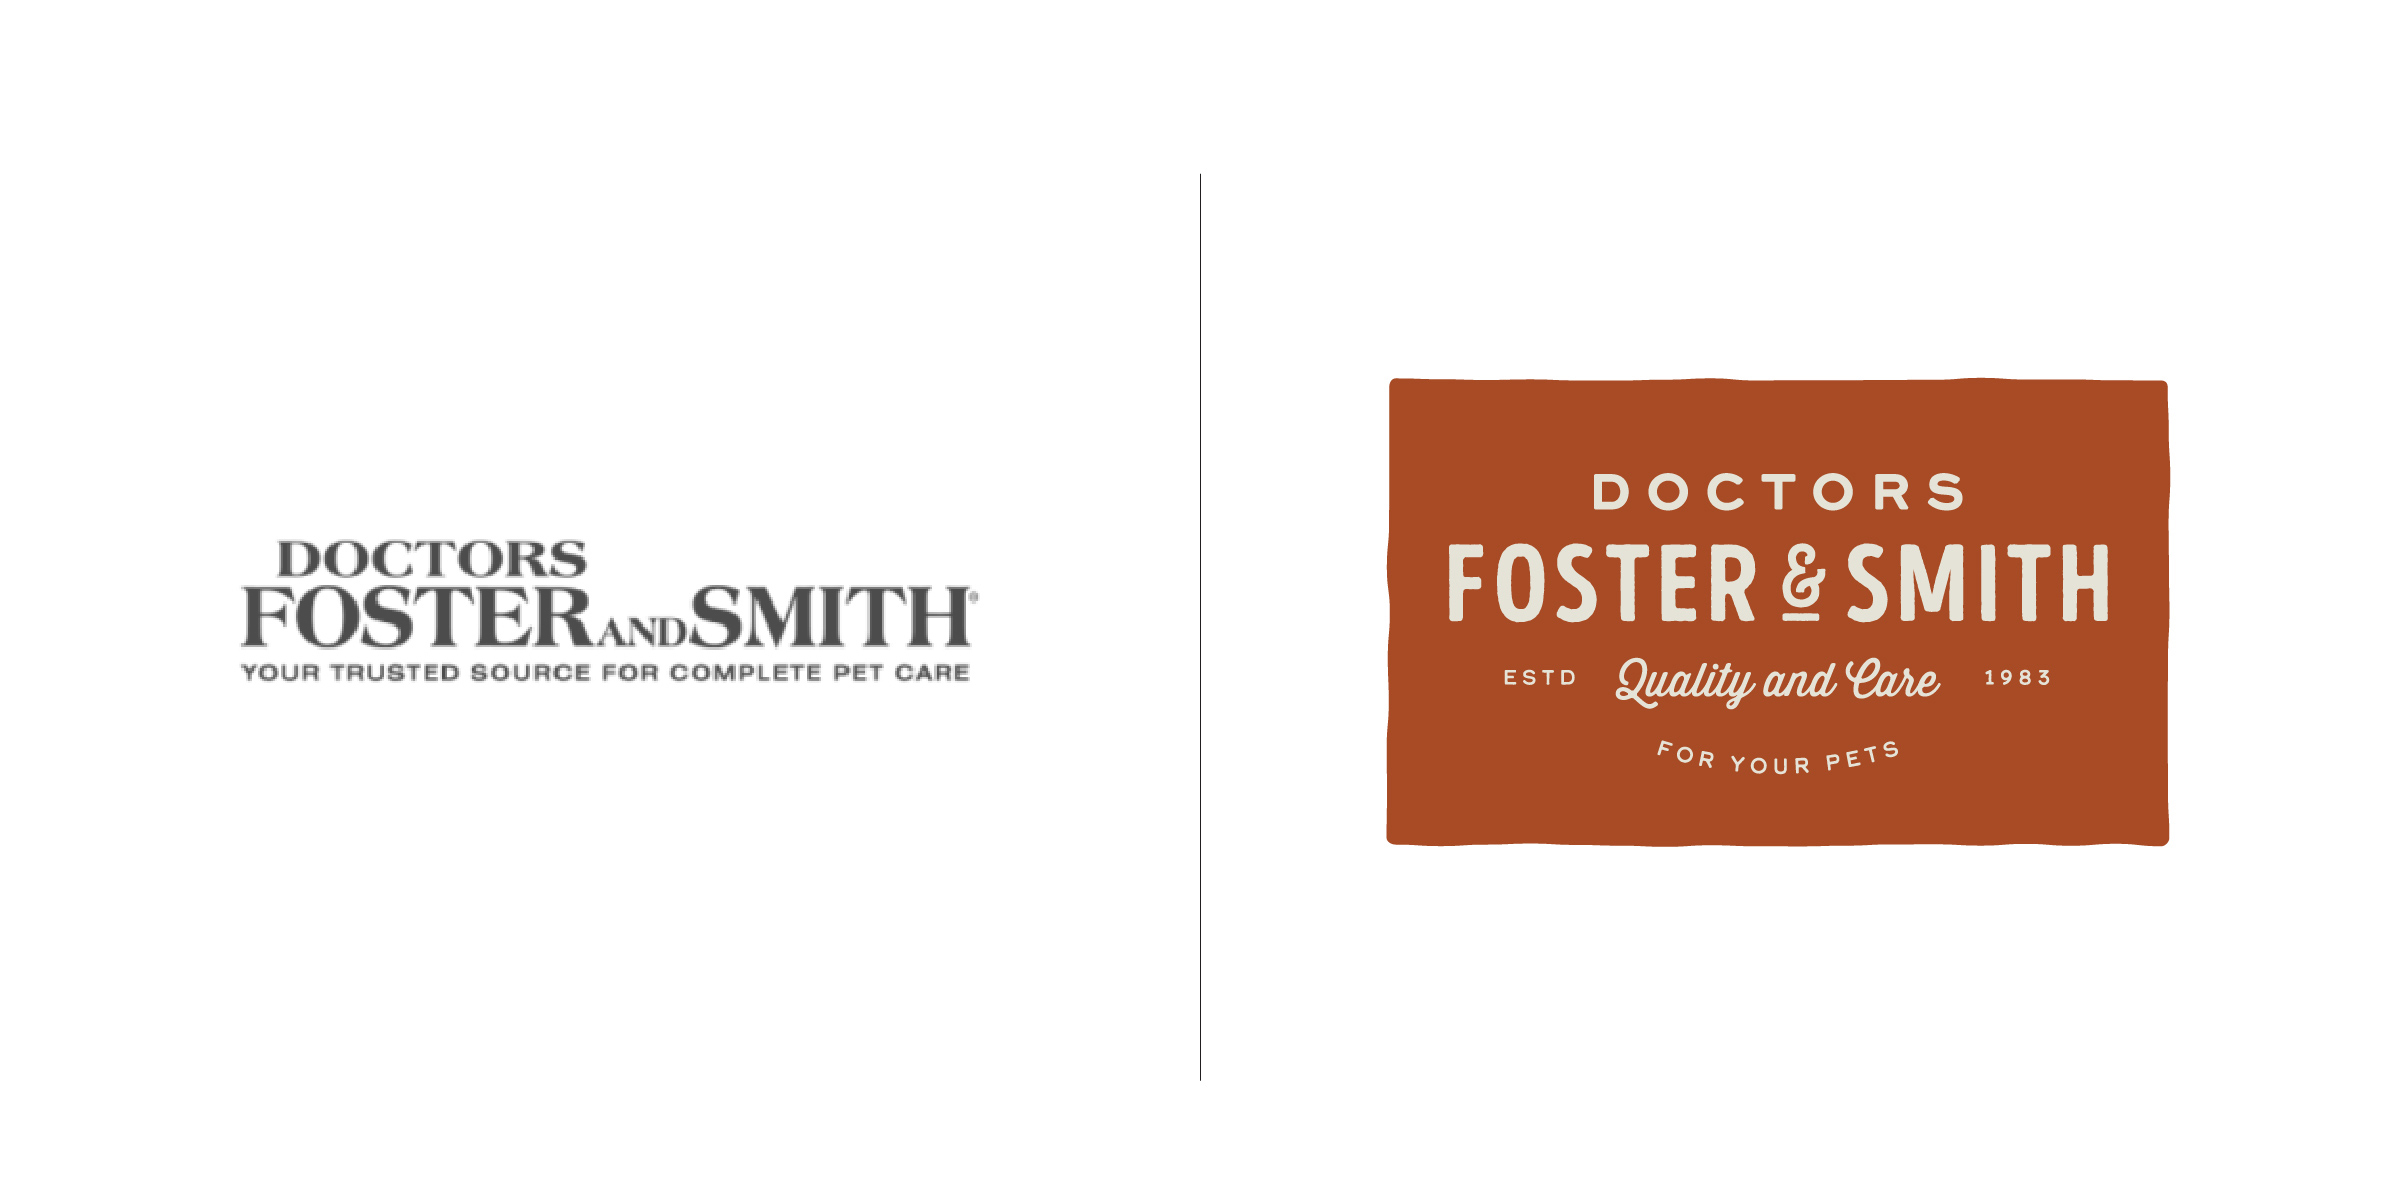  The client — PETCO (an American privately held pet retailer in the United States, with corporate offices in San Diego) and Doctors Foster &amp; Smith  The goal —   To craft an approachable logo and tagline that instilled trust with a caring bedside 